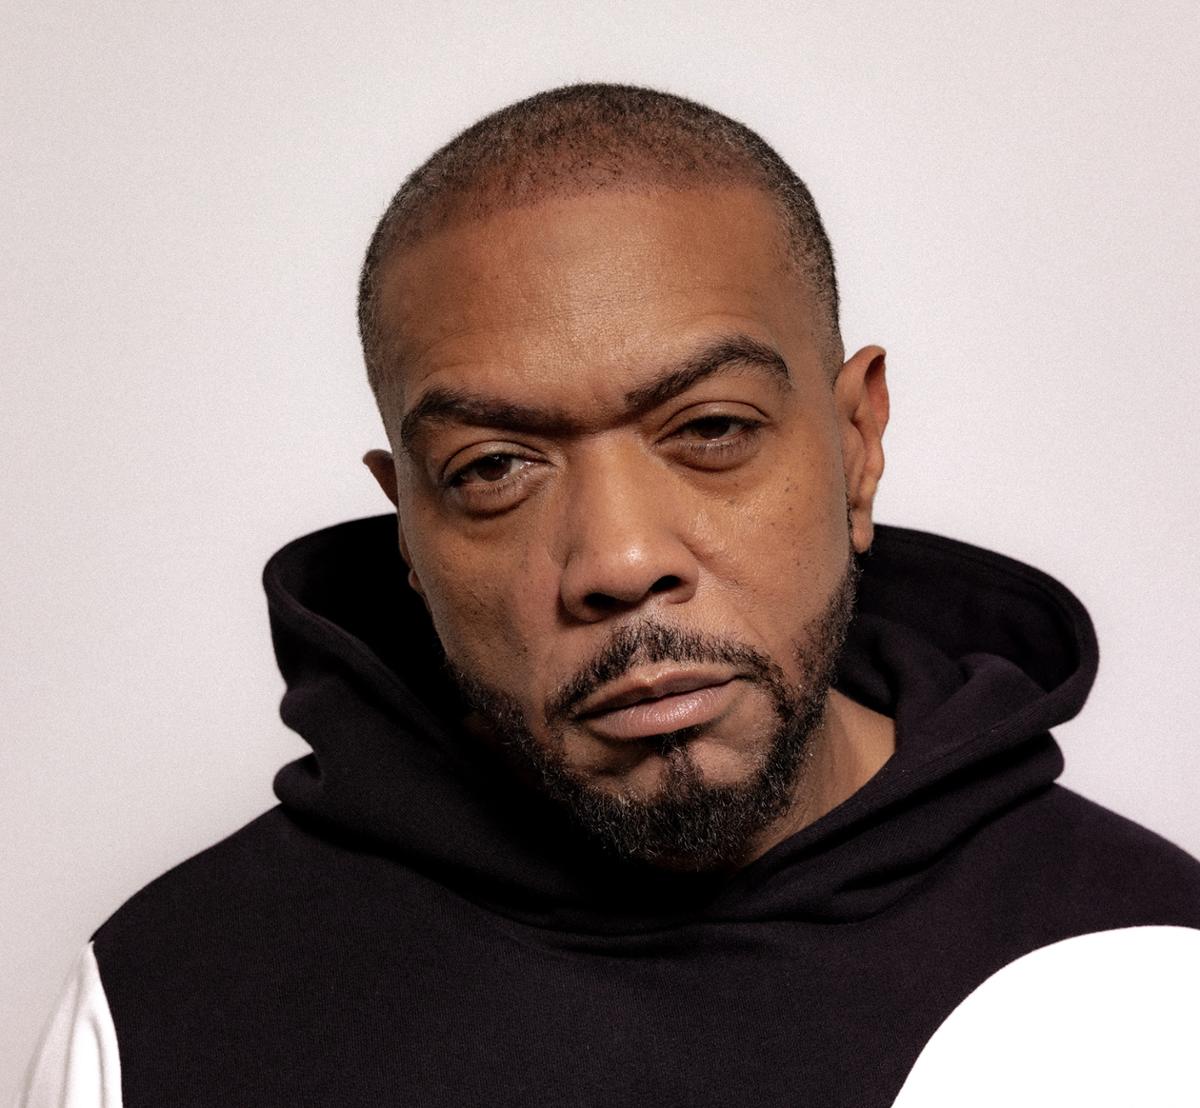 Timbaland is a globally-renowned producer who has worked with stars including Jay Z, Madonna, Coldplay, Justin Timberlake and many more / GWS